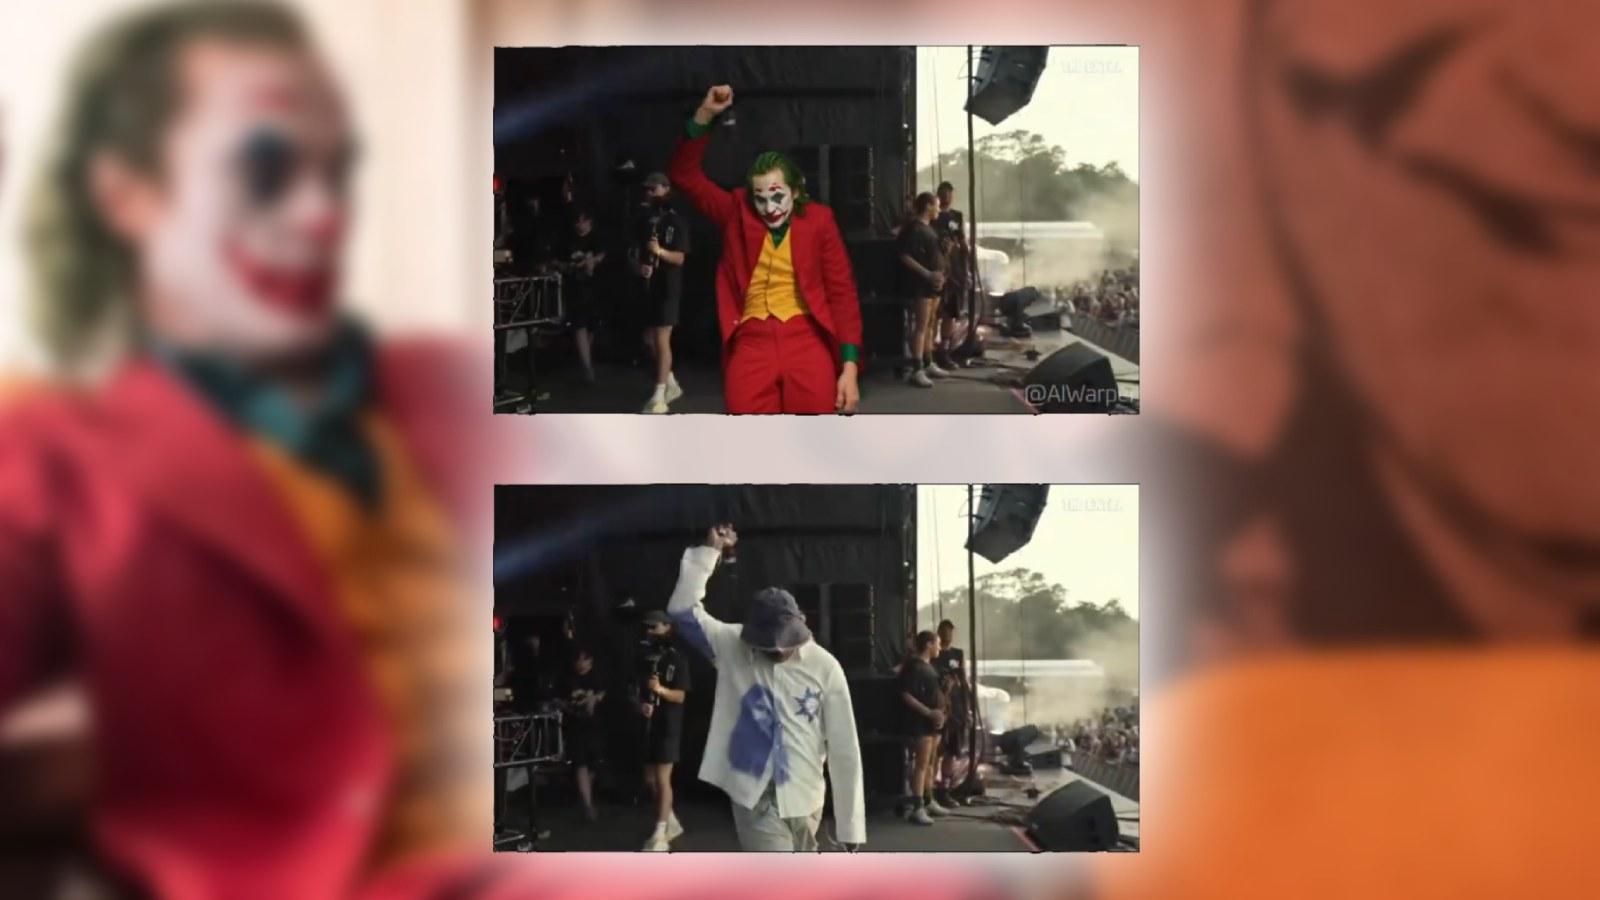 The Joker image blurred with Lil Yachty alongside a deepfaked version centered aboce